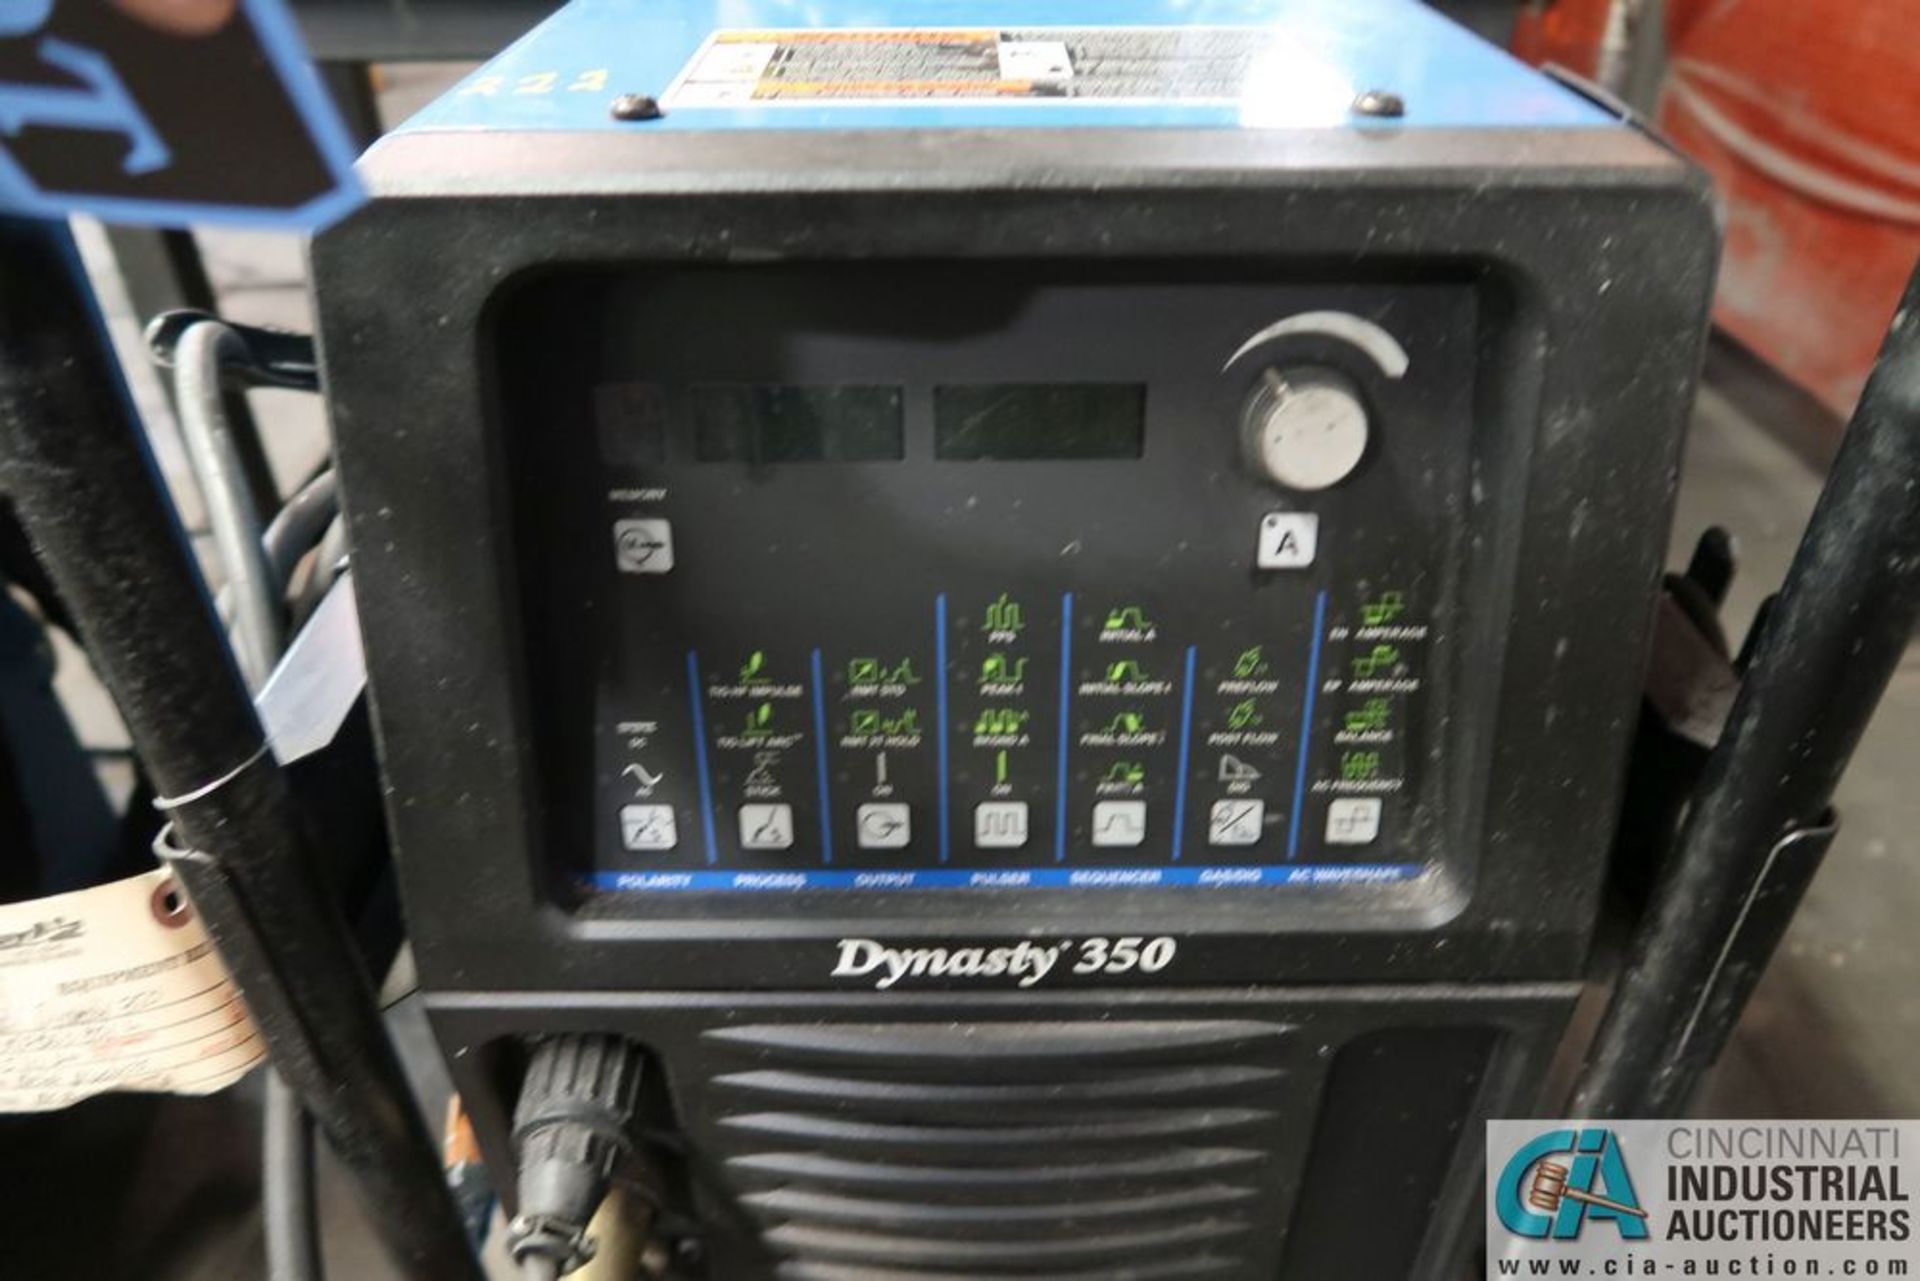 350 AMP MILLER MODEL DYNASTY 350 CART MOUNTED TIG WELDING POWER SOURCE; S/N MF06081L WITH LEADS - Image 2 of 3